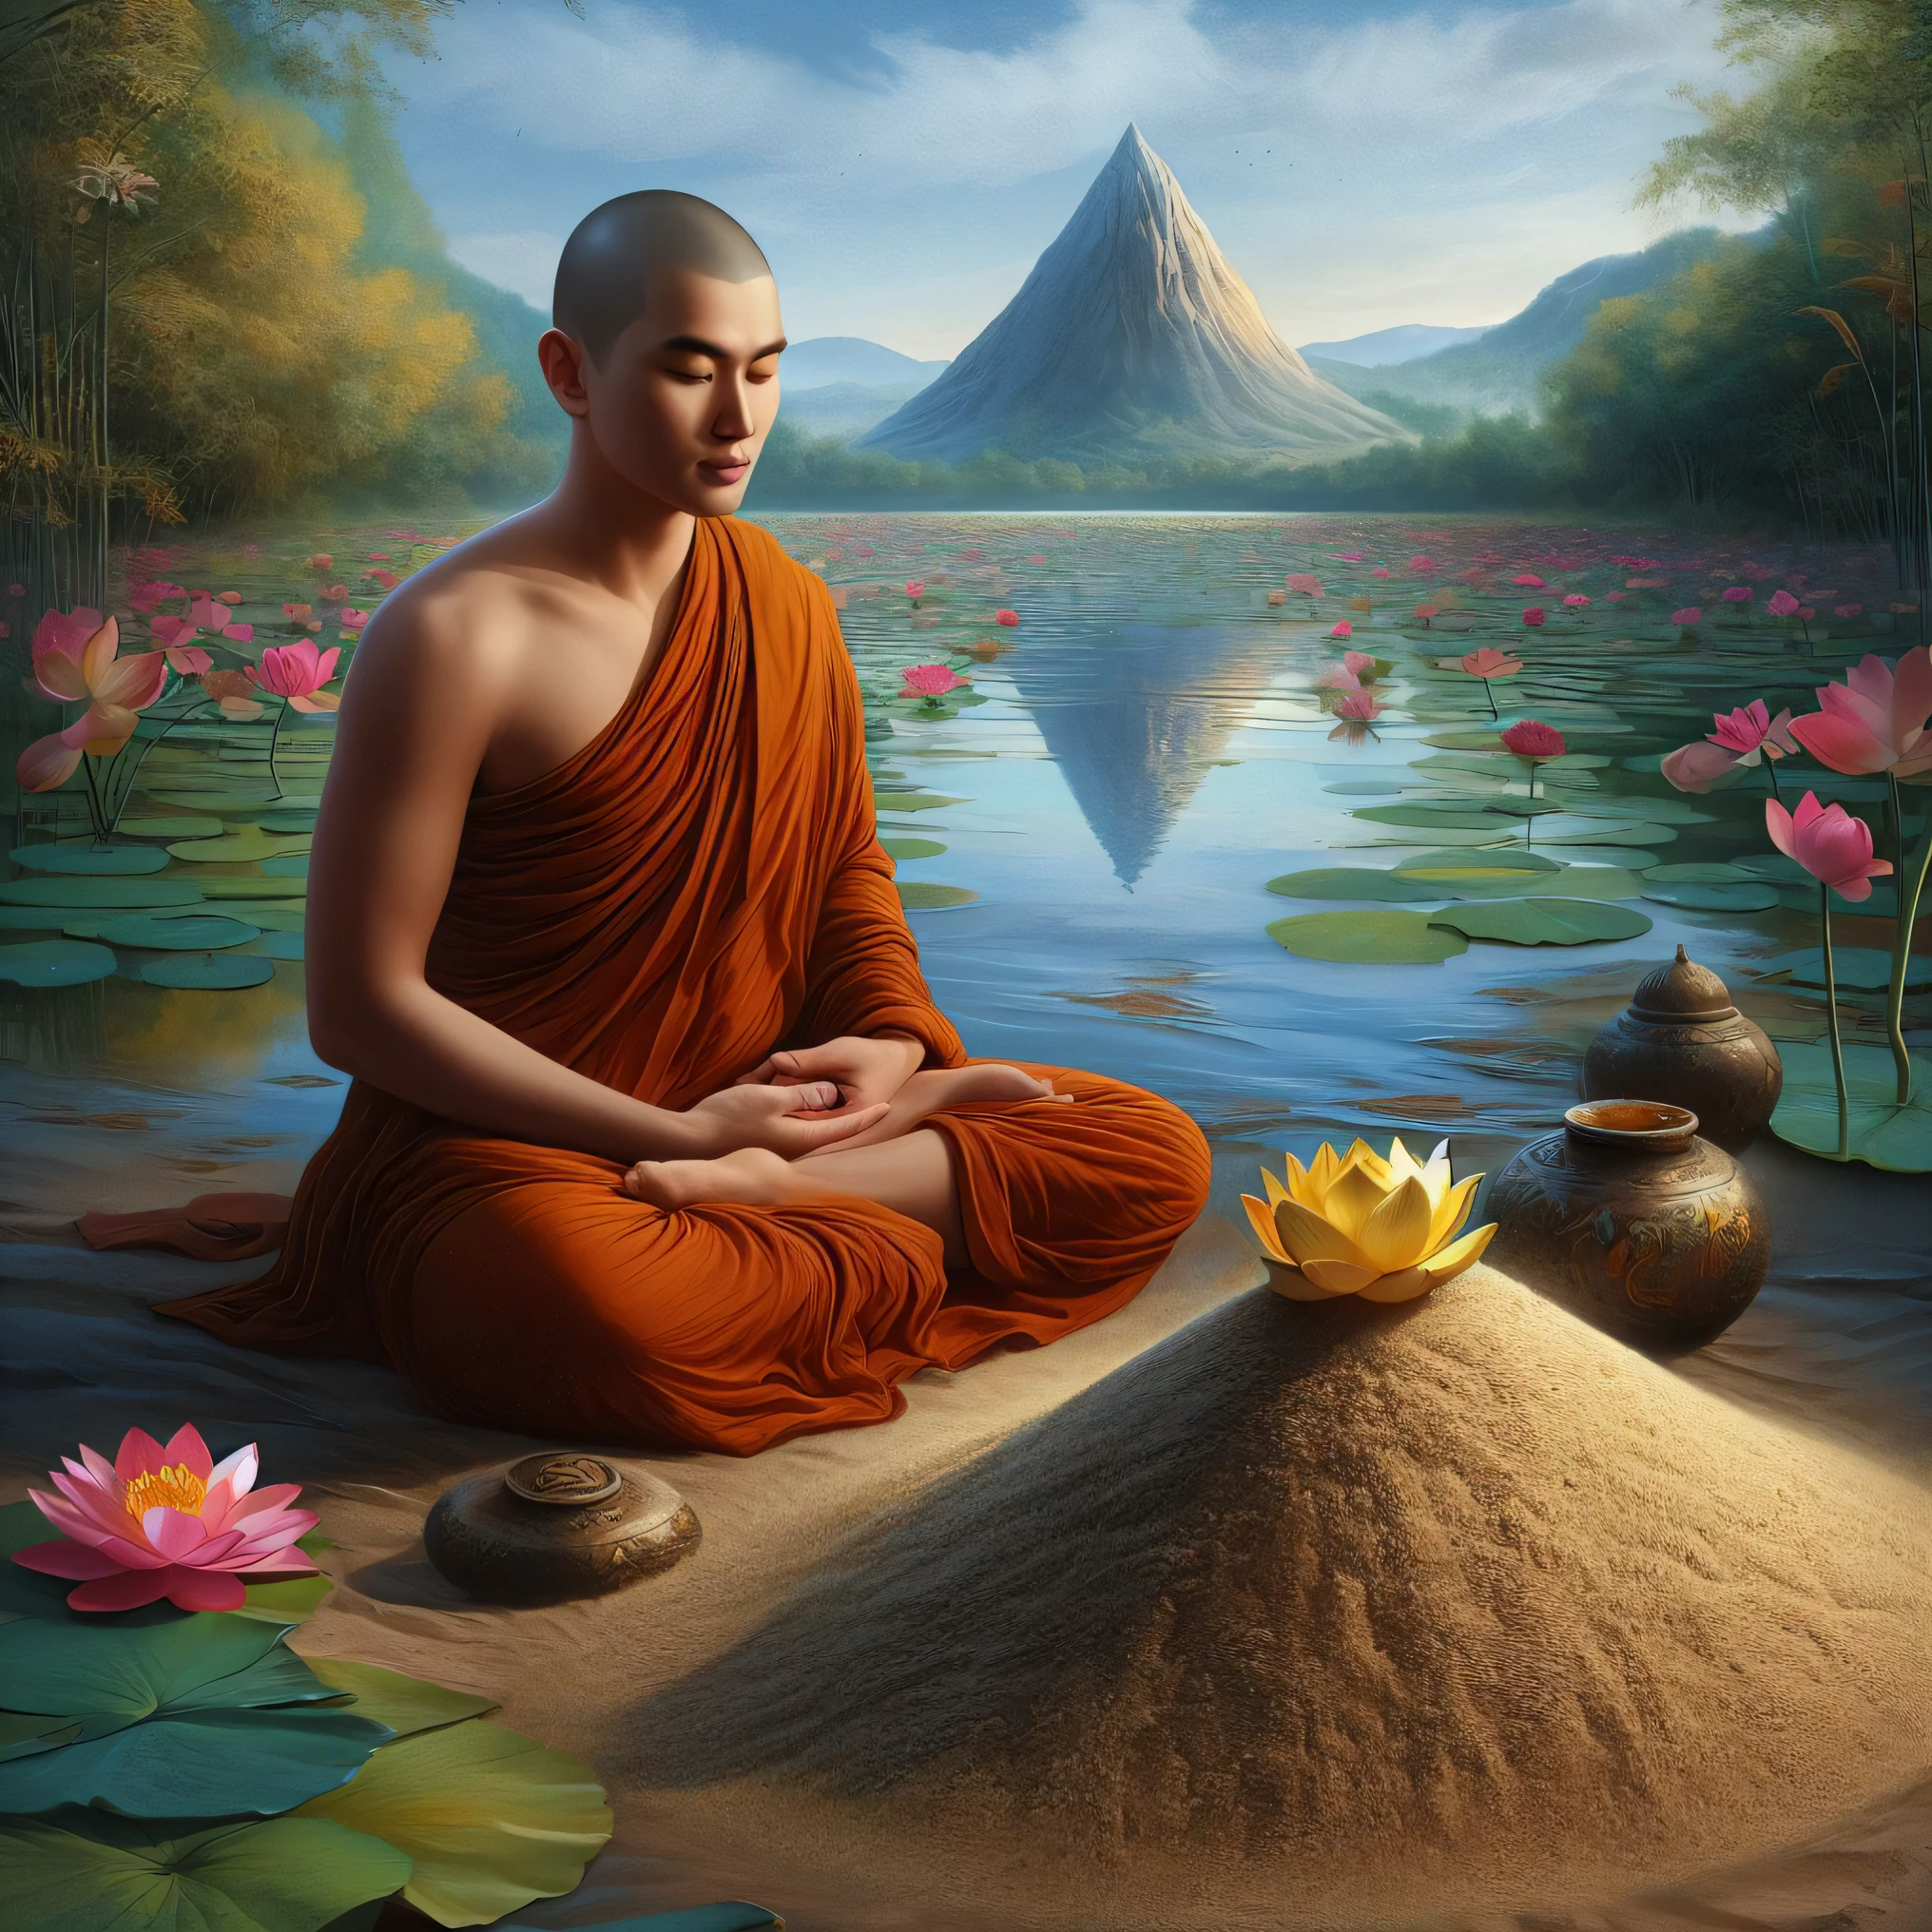 painting of a monk sitting in a lotus position in front of a lake, monk meditate, buddhist monk meditating, buddhist, buddhist monk, buddhism, meditation, meditating, zen meditation, the buddha, portrait of monk, samsara, monk, hindu stages of meditation, padmasana, on path to enlightenment, sitting on a lotus flower, buddha, serene expression